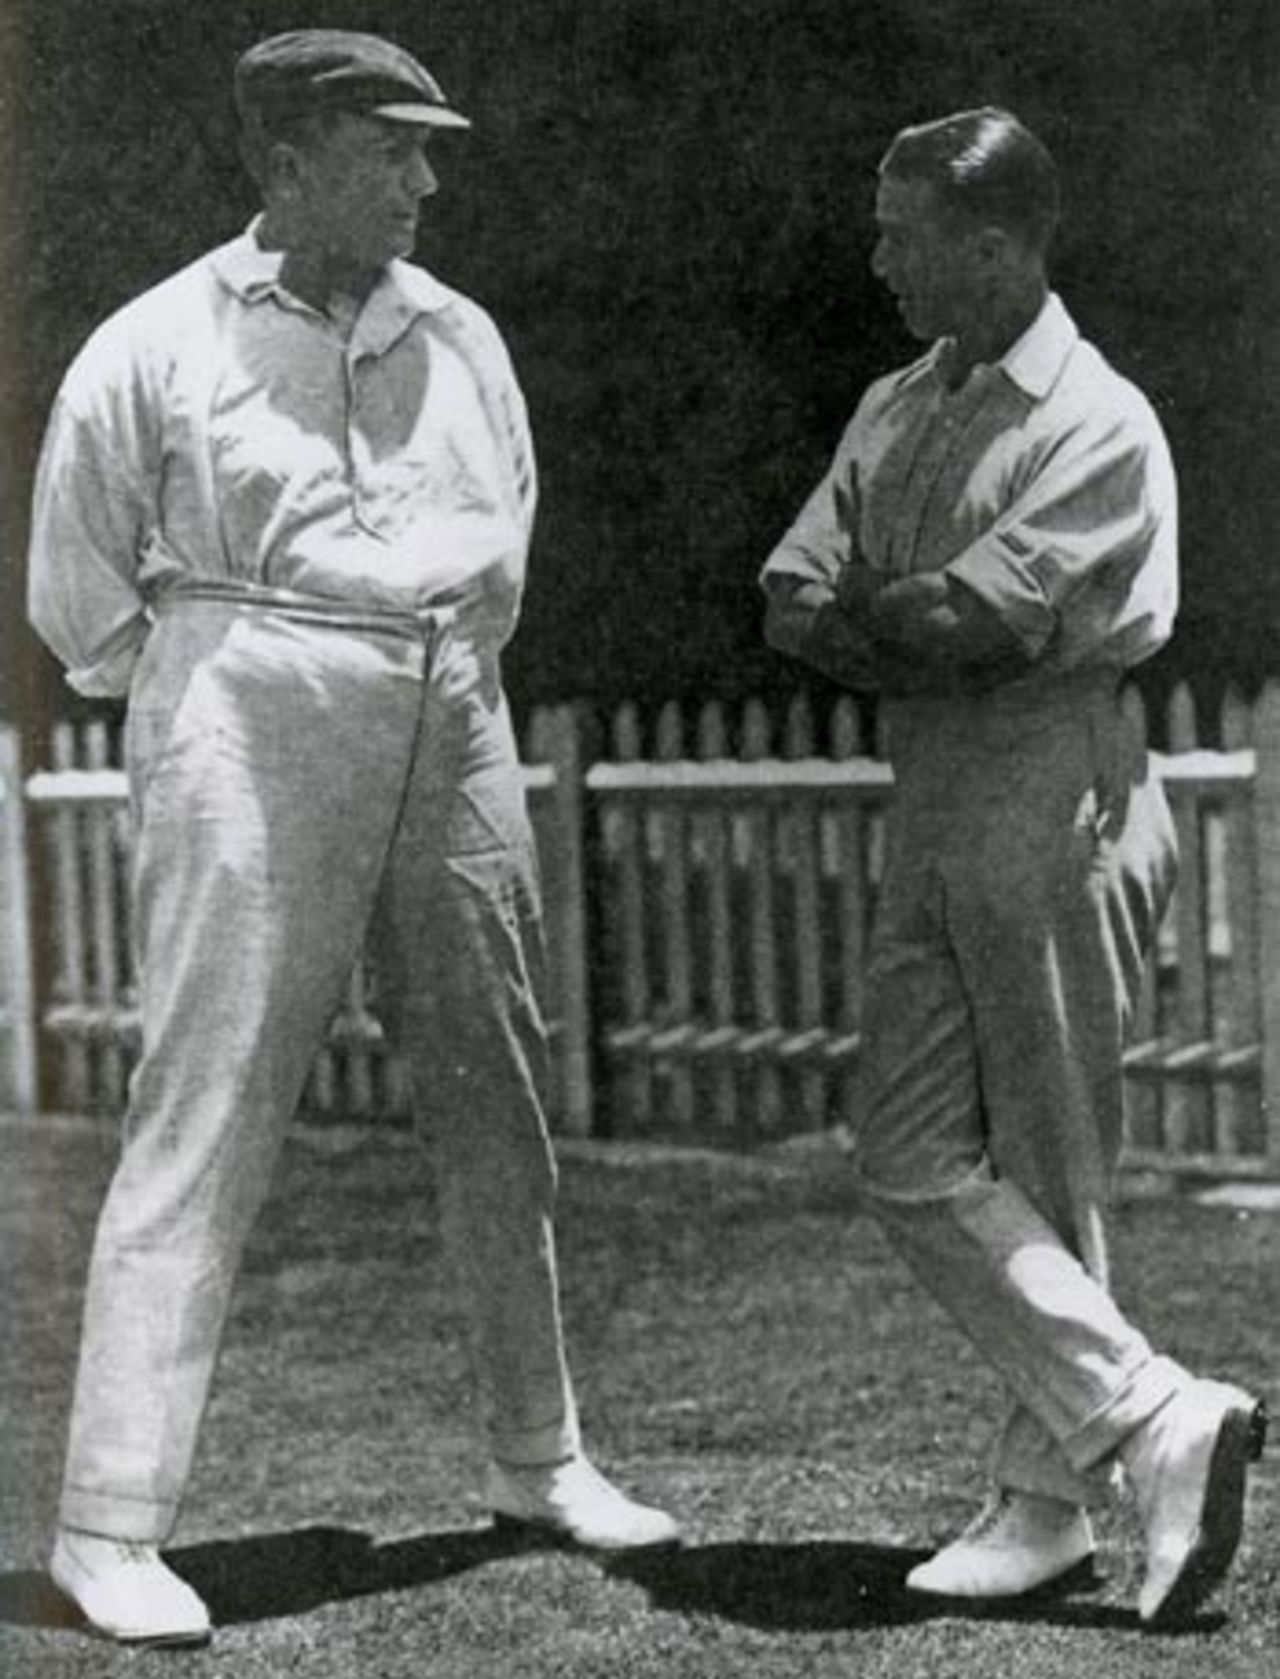 Warwick Armstrong and Johnny Douglas ahead of the Sydney Test, 1920-21